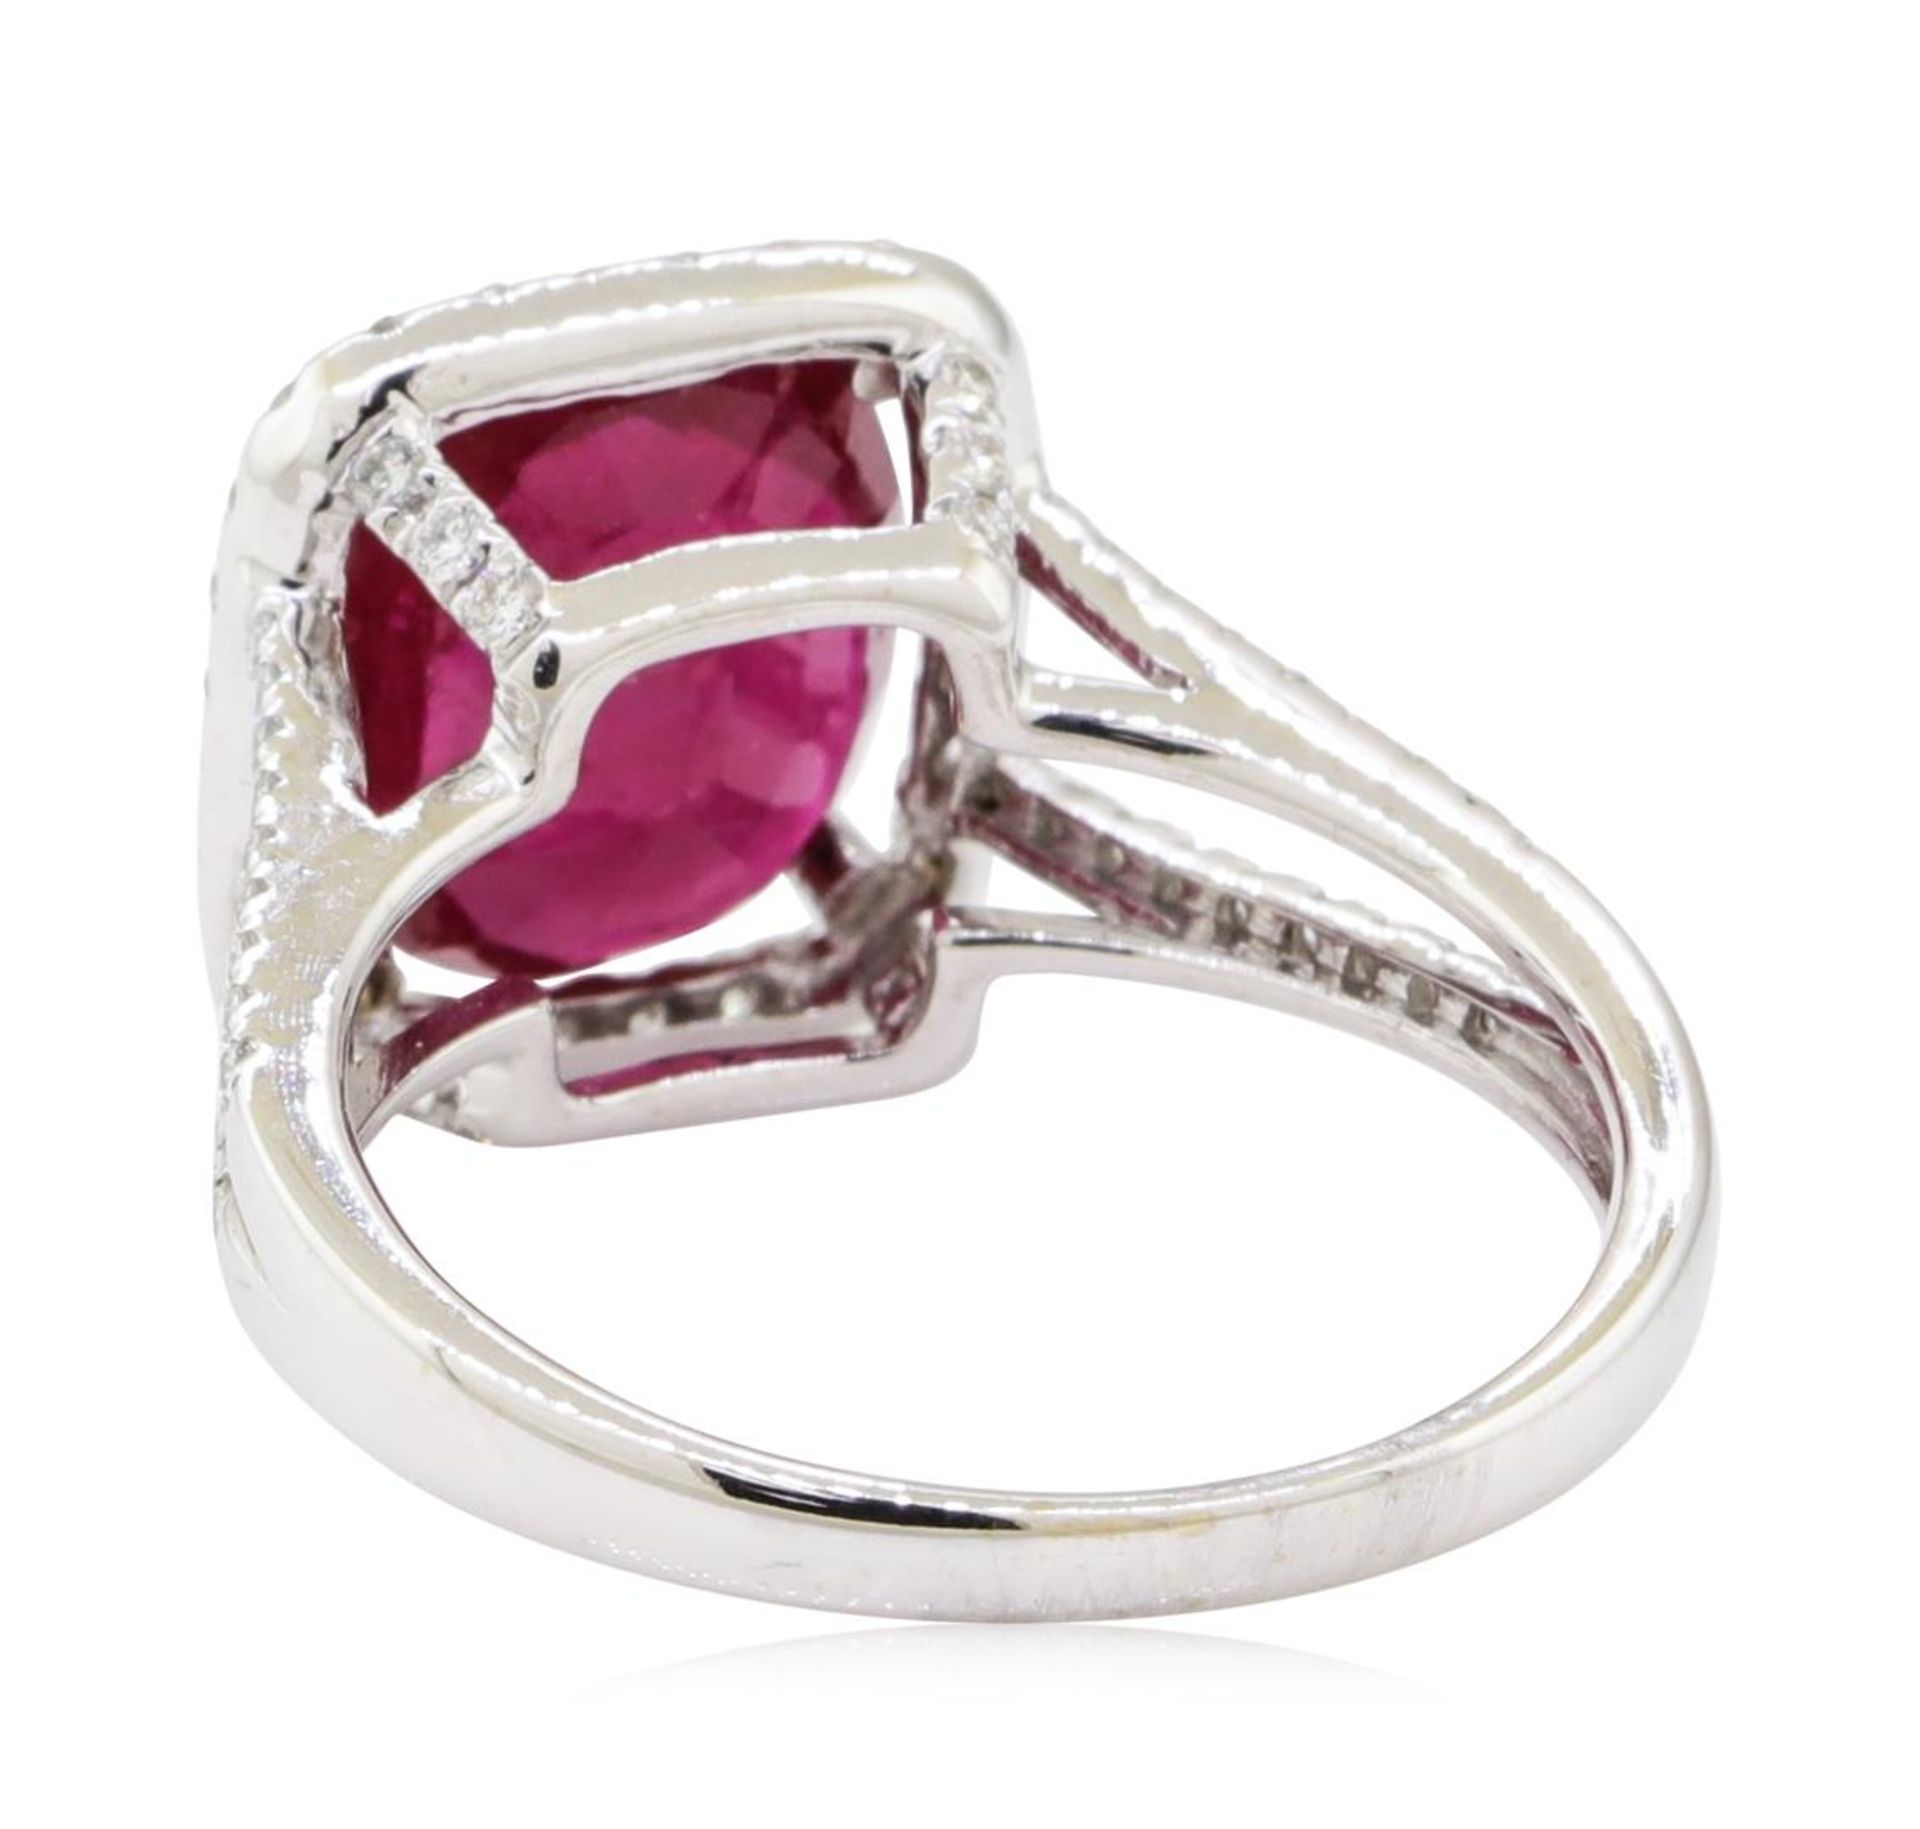 4.40 ctw Ruby and Diamond Ring - 18KT White Gold - Image 3 of 5